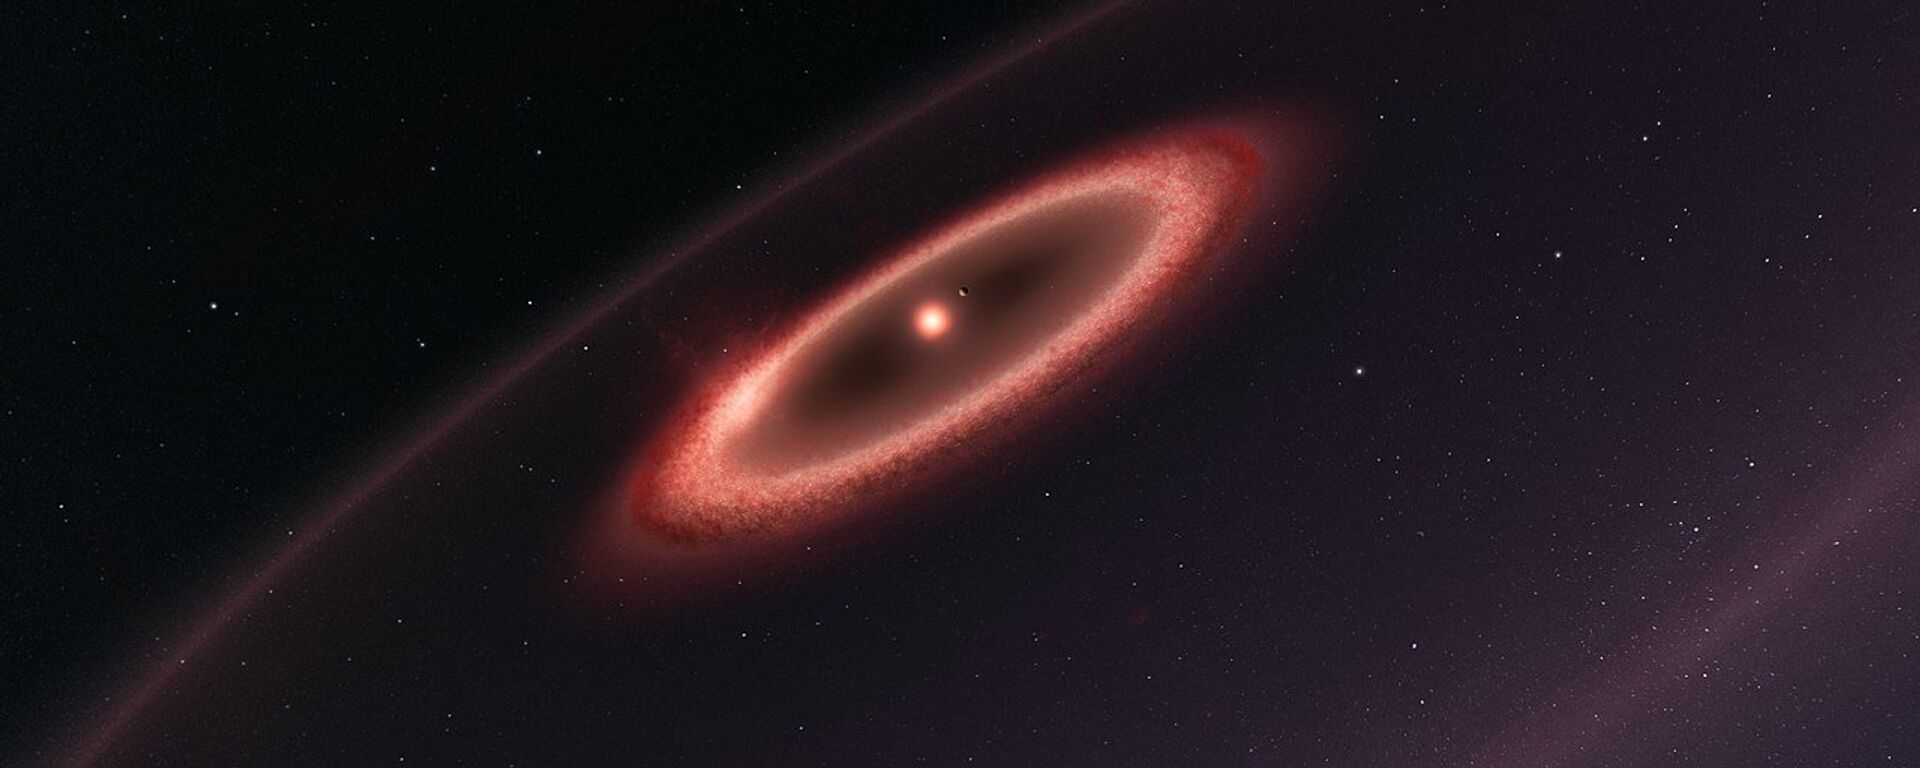 This artist’s impression shows how the newly discovered belts of dust around the closest star to the Solar System, Proxima Centauri, may look - Sputnik International, 1920, 27.02.2018